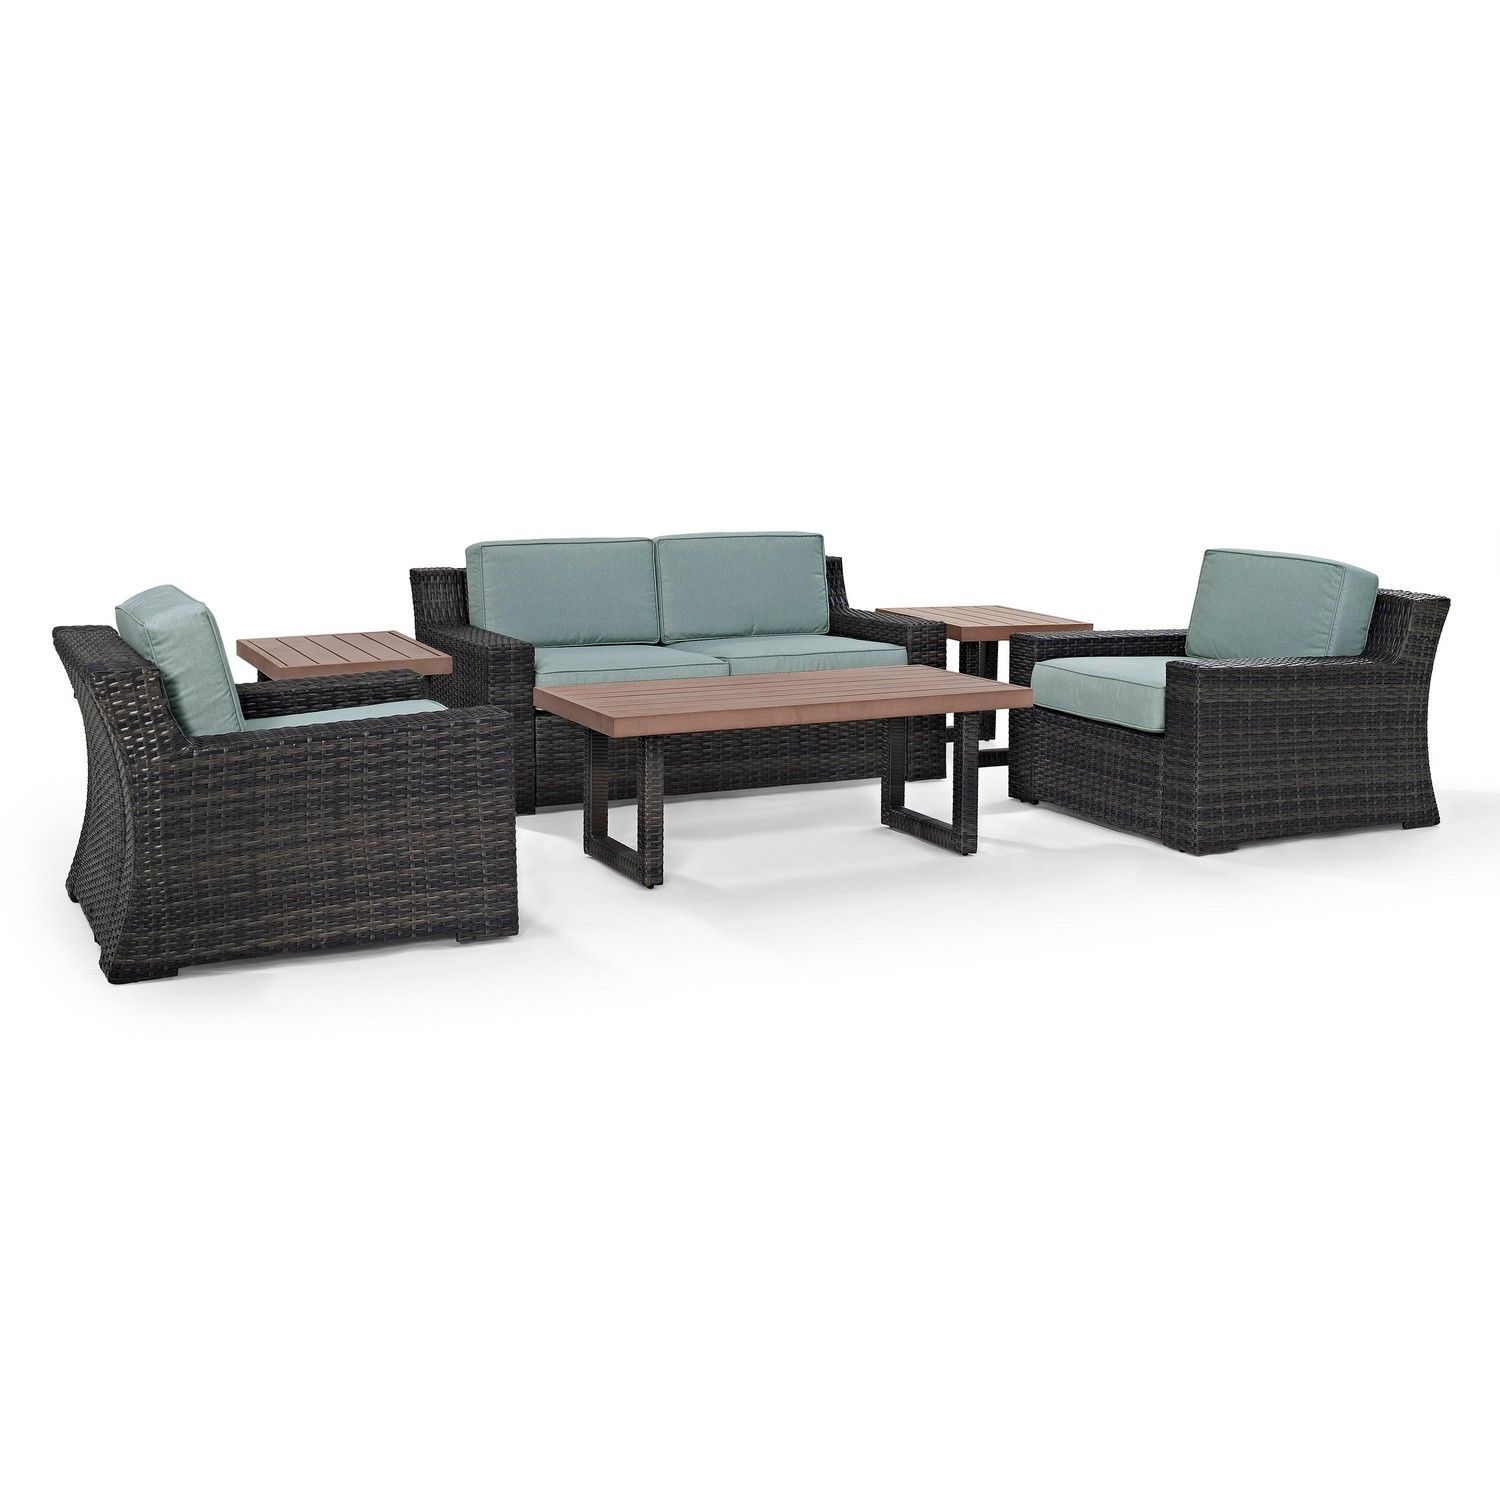 Crosley Beaufort 6-PC Outdoor Wicker Conversation Set - Loveseat, 2 Chairs, Coffee Table, 2 Side Tables - Mist/Brown